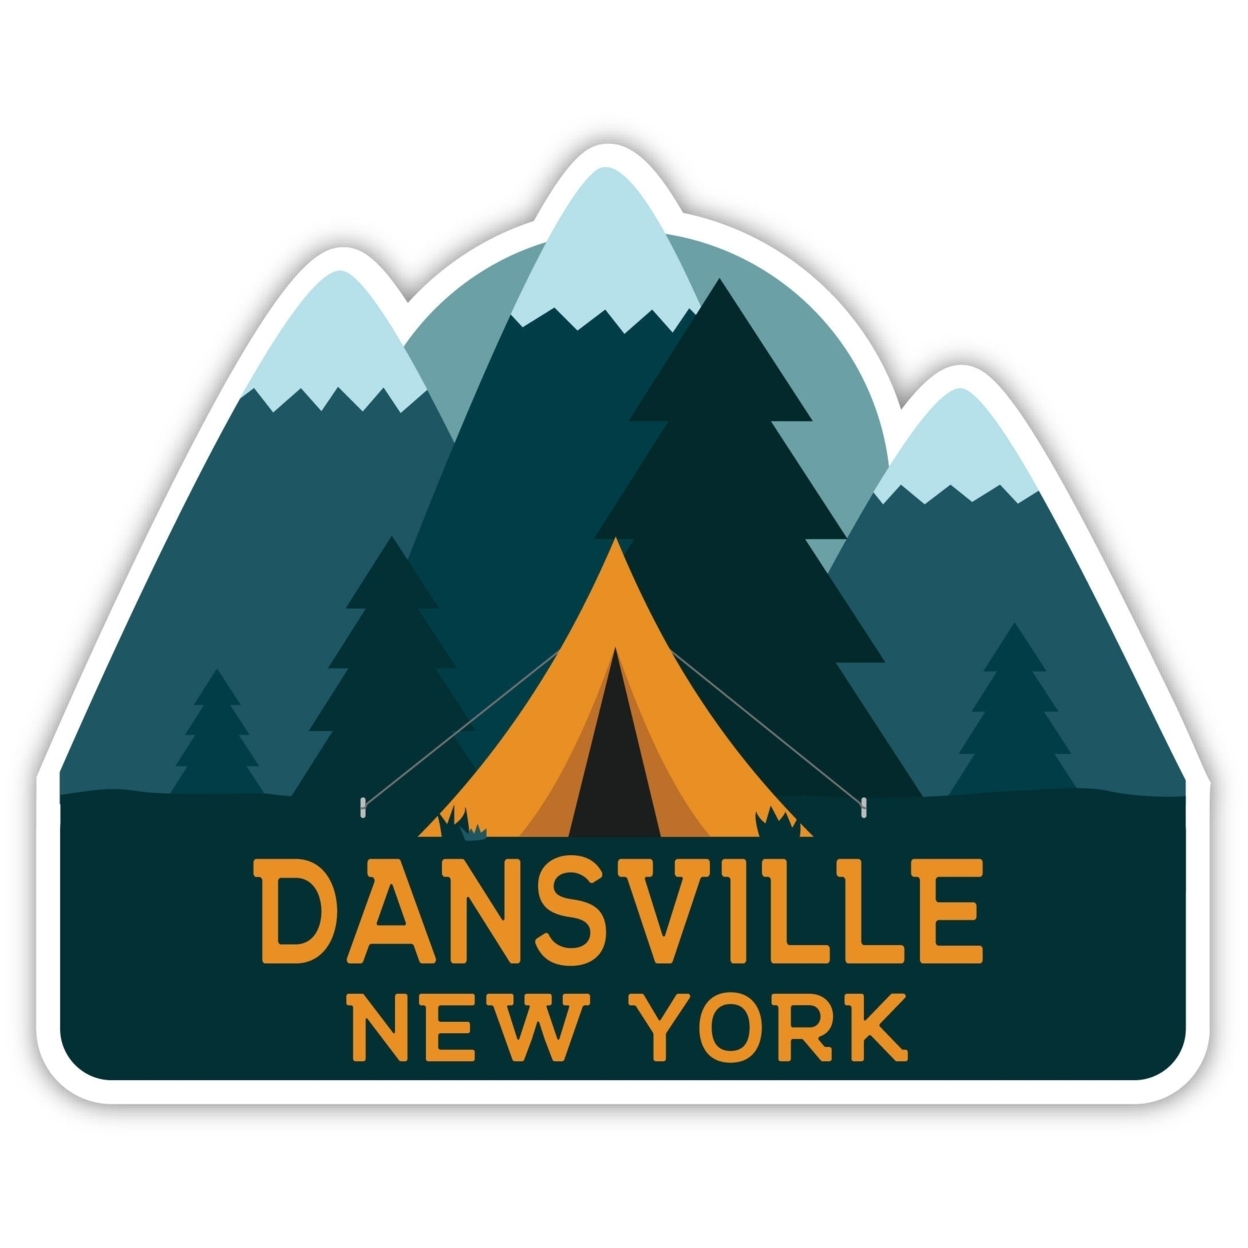 Dansville New York Souvenir Decorative Stickers (Choose Theme And Size) - 4-Pack, 12-Inch, Tent